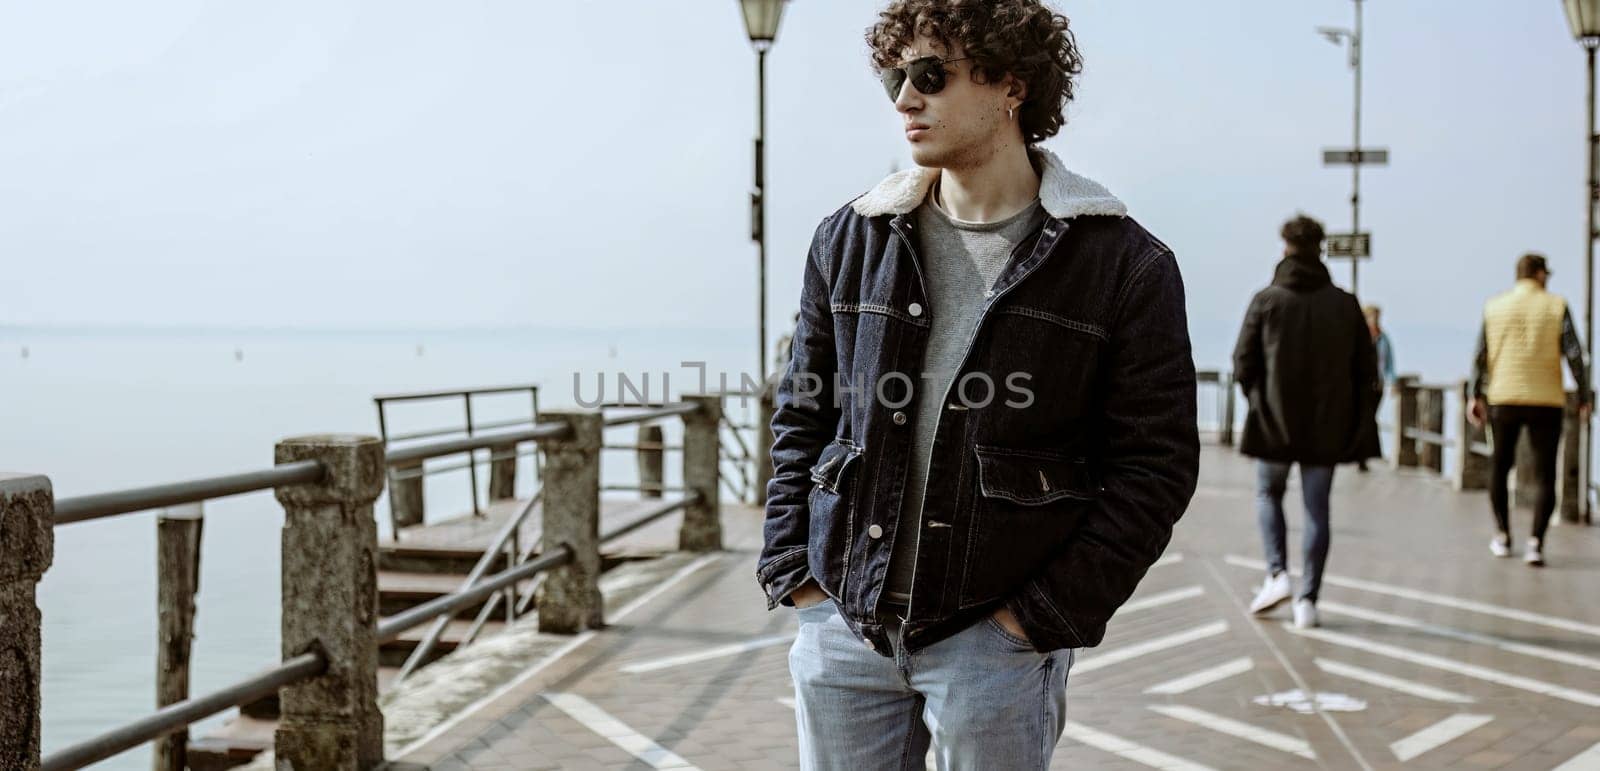 A young man taking a pensive walk along a pier, lost in his thoughts and seemingly carrying a heavy heart.